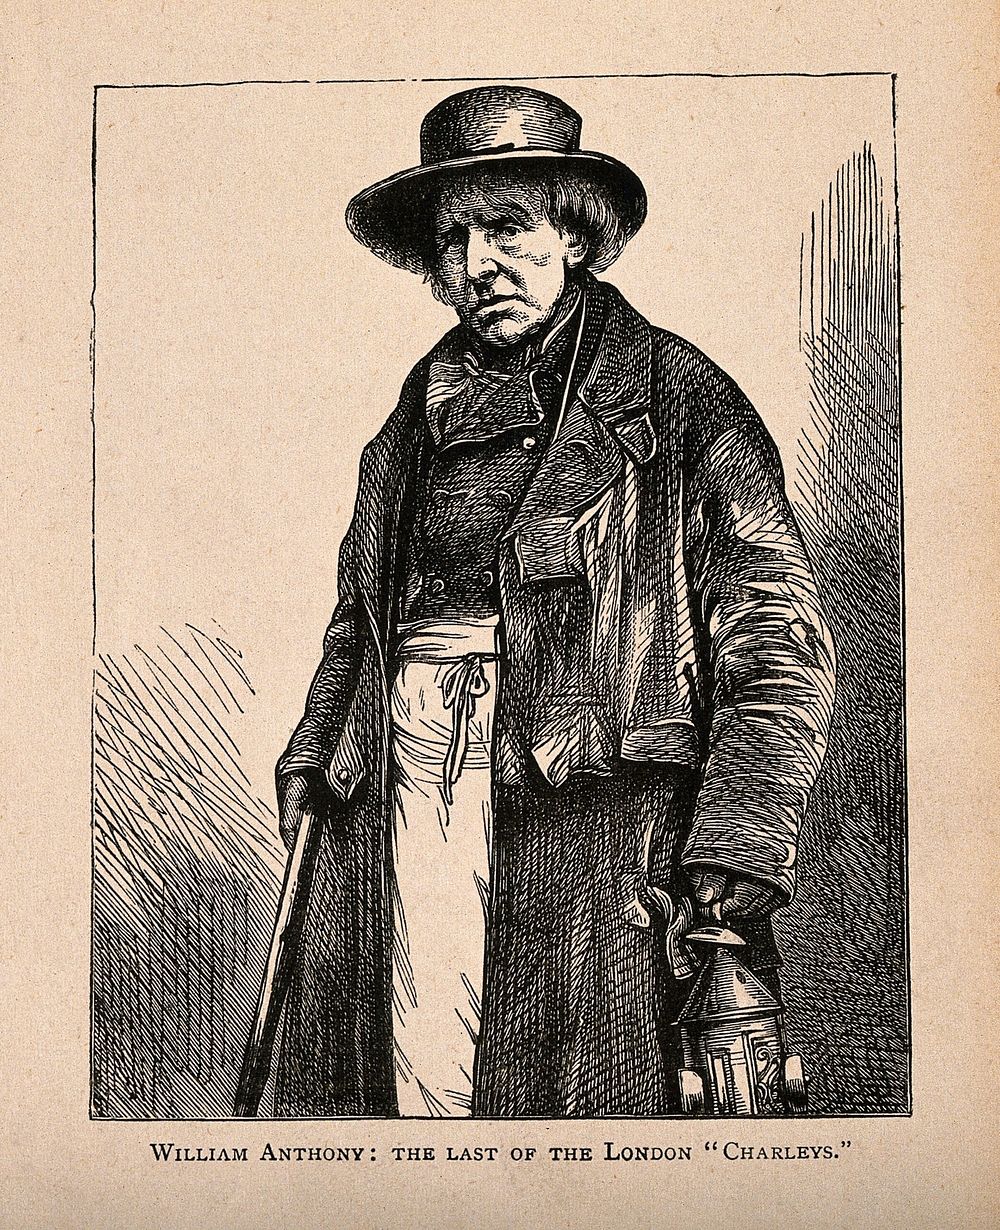 William Anthony, the last of the London night watchmen. Reproduction of wood engraving.